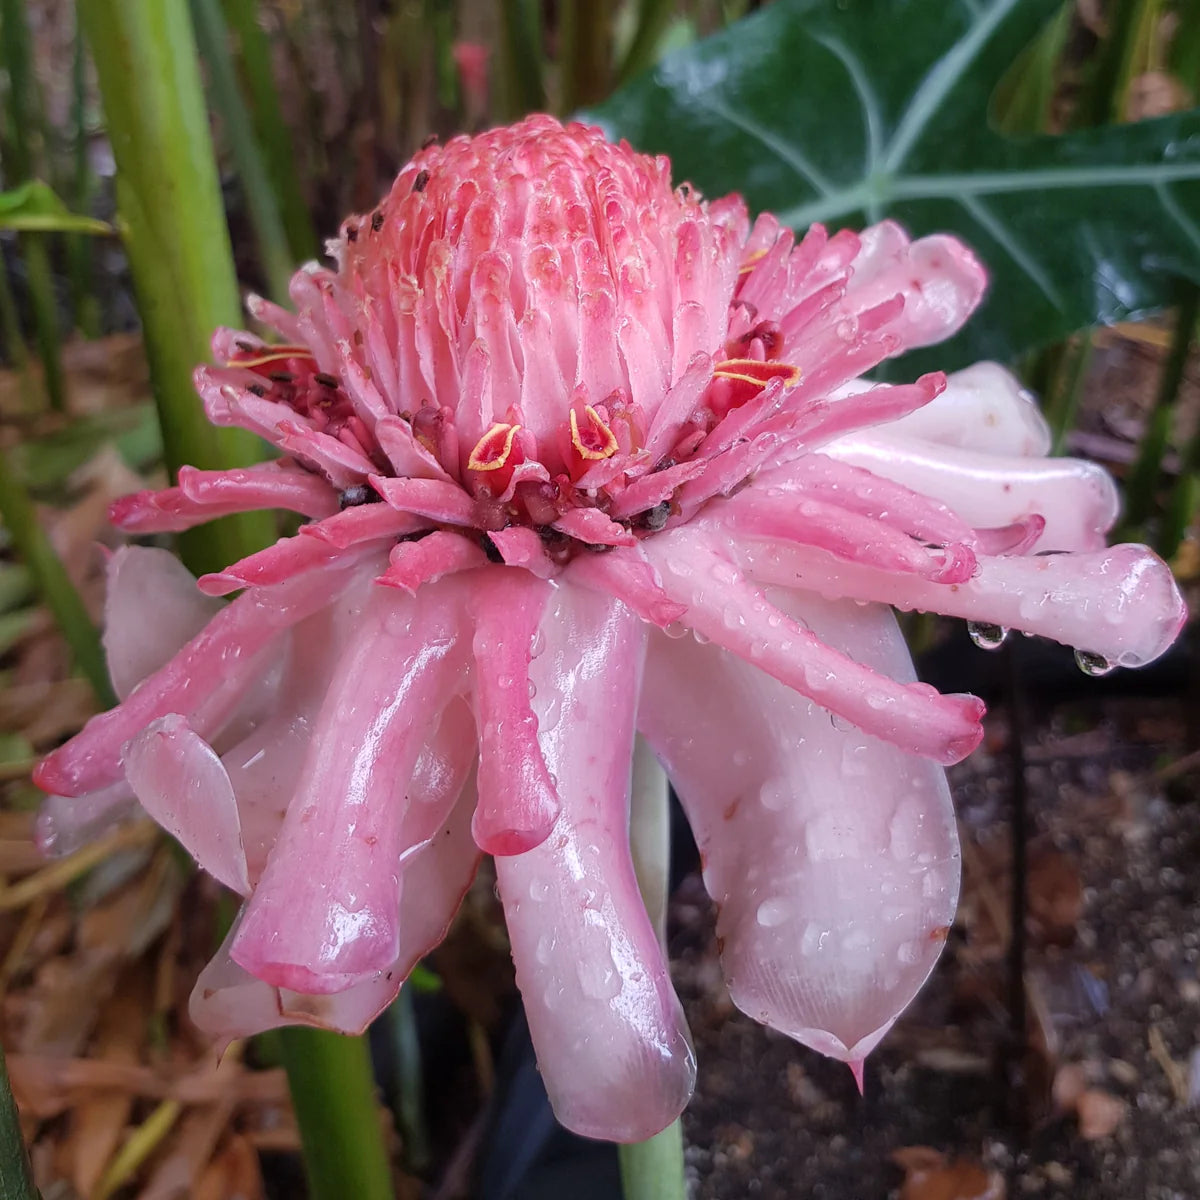 Torch Ginger Live Plants (Pack of 3) Red, Pink and White